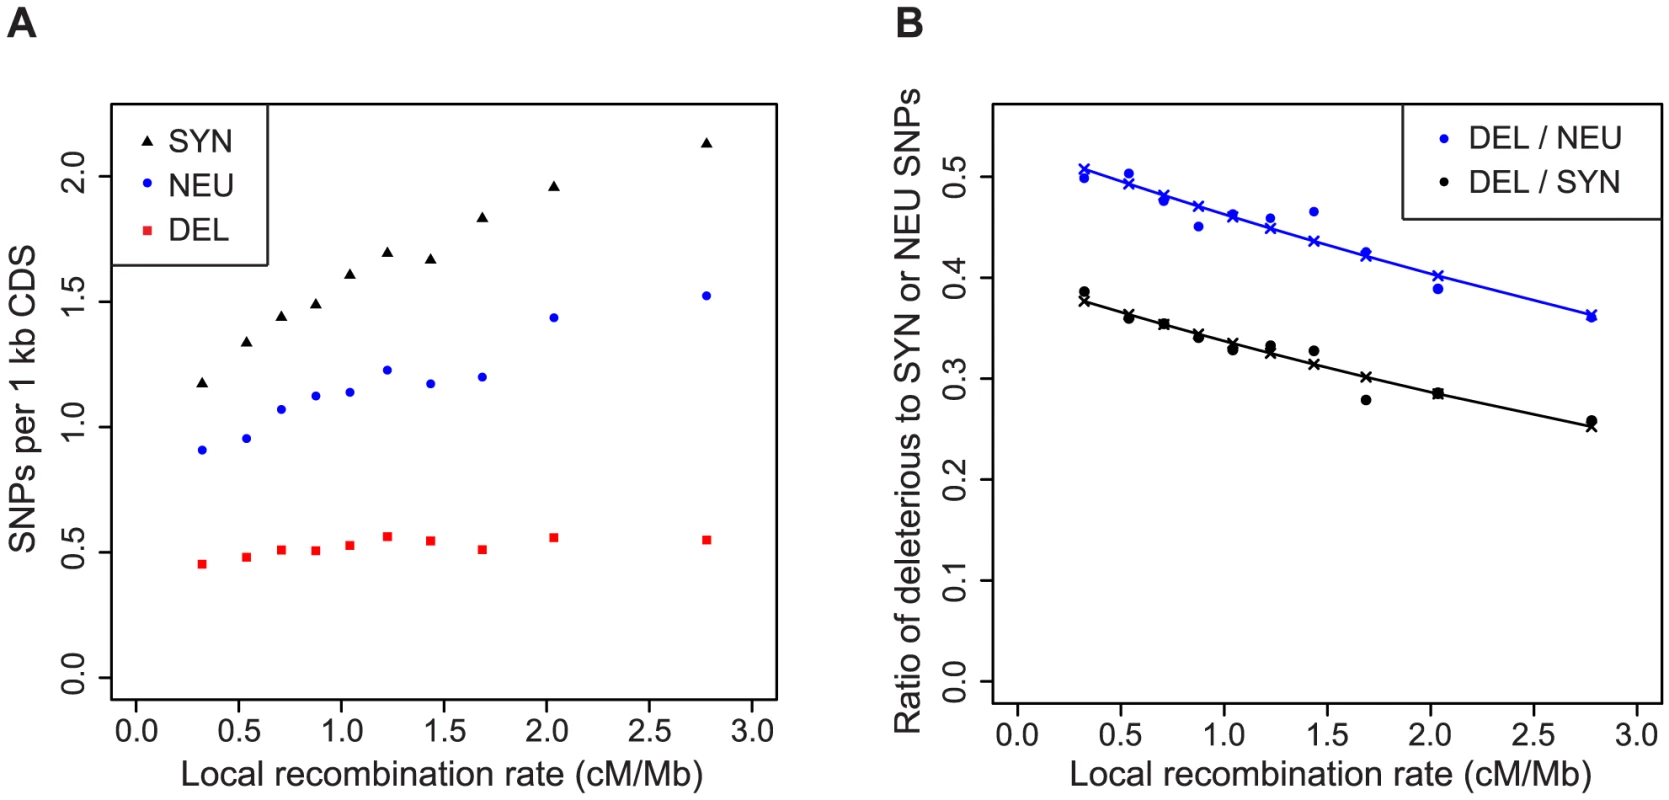 Regions of low recombination are enriched for deleterious SNPs.